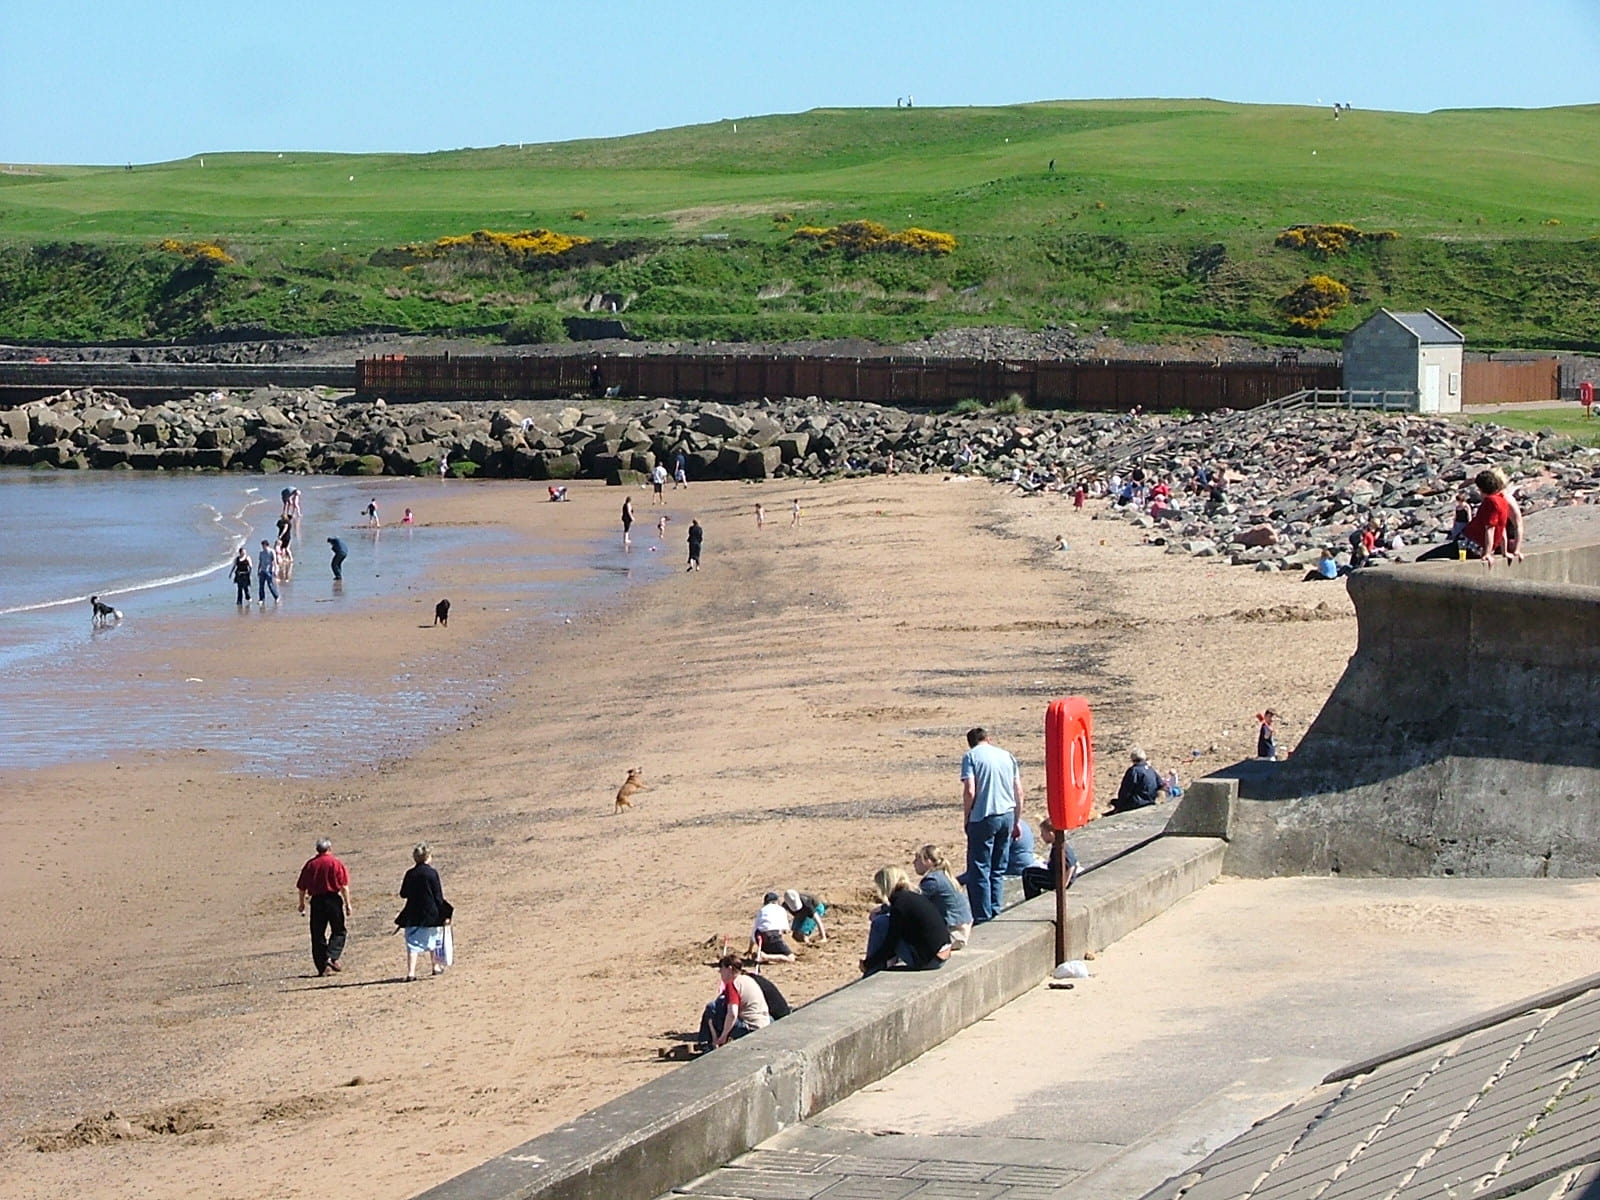 Locals in Aberdeenshire enjoy the beach on a sunny day. There are green hills in the distance.